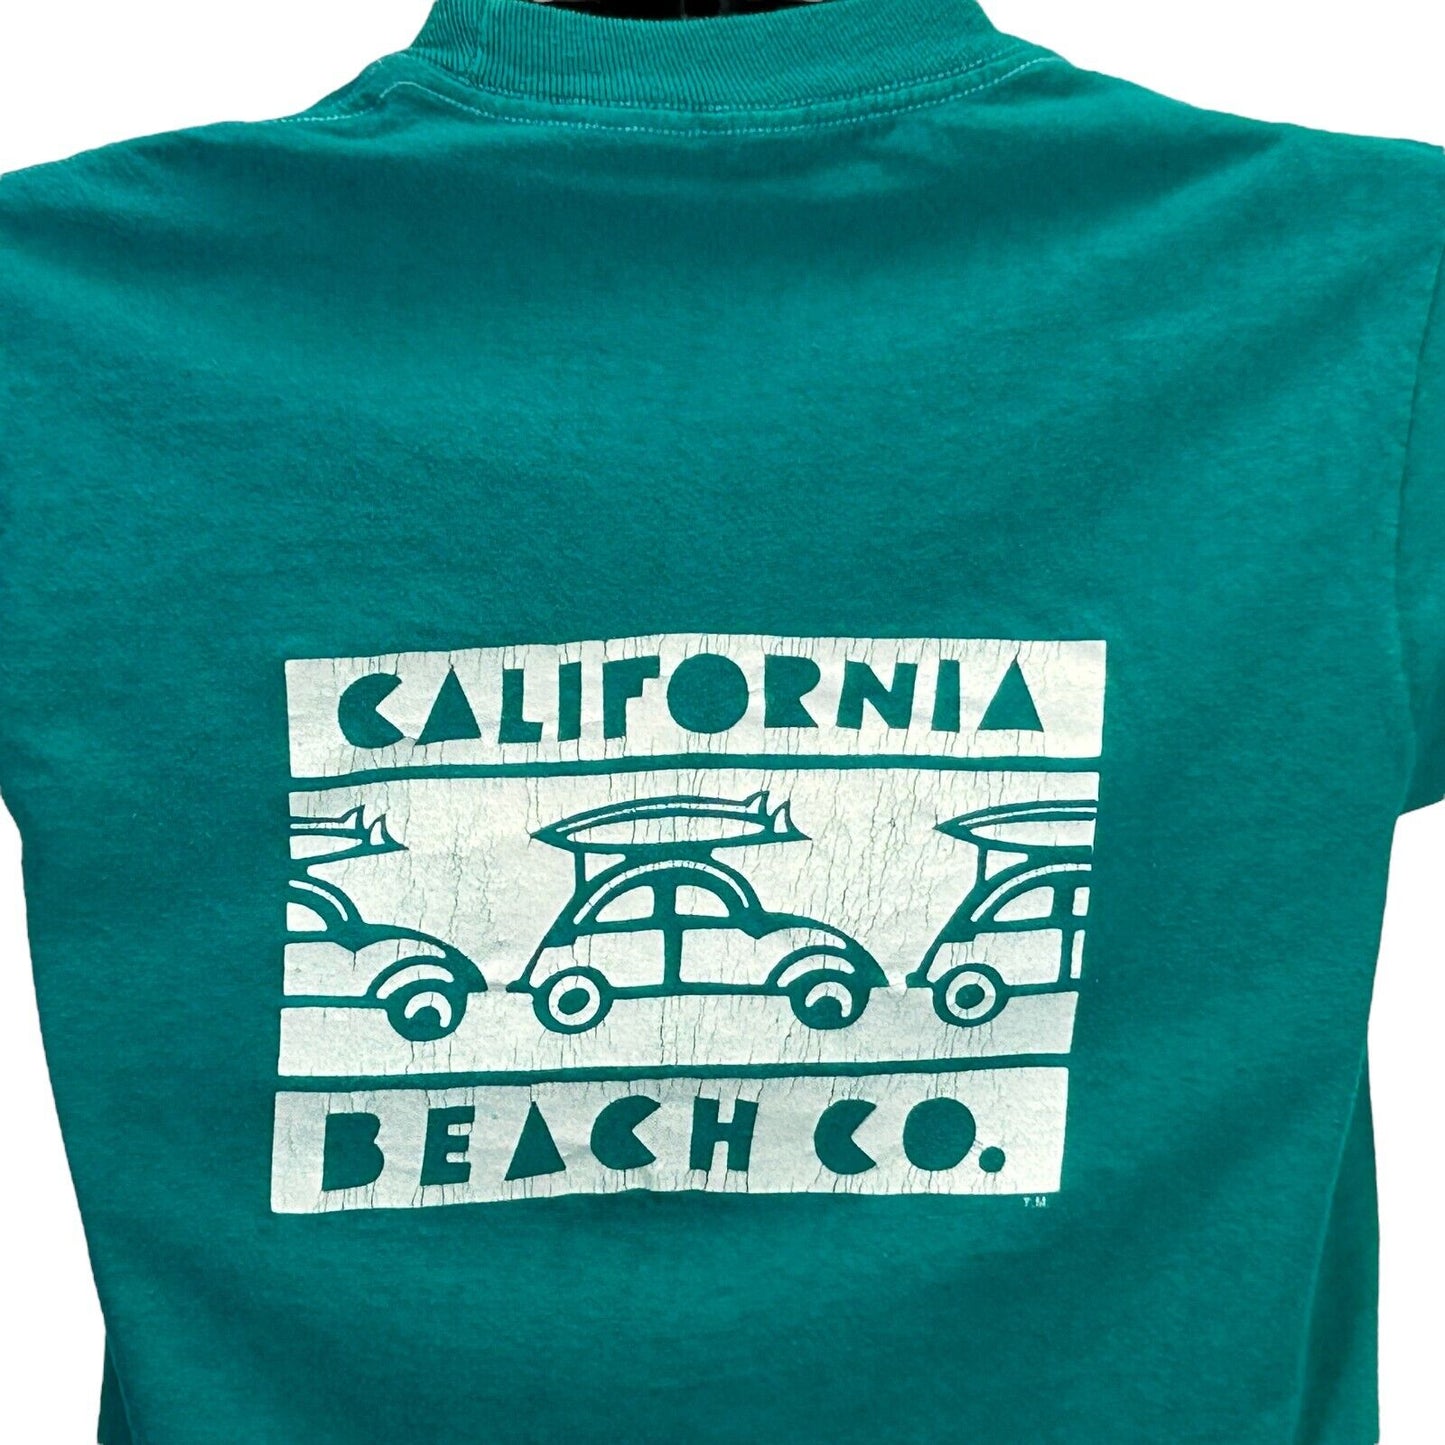 California Beach Co Vintage 80s T Shirt Surfing Surfer VW Volkswagen USA X-Small